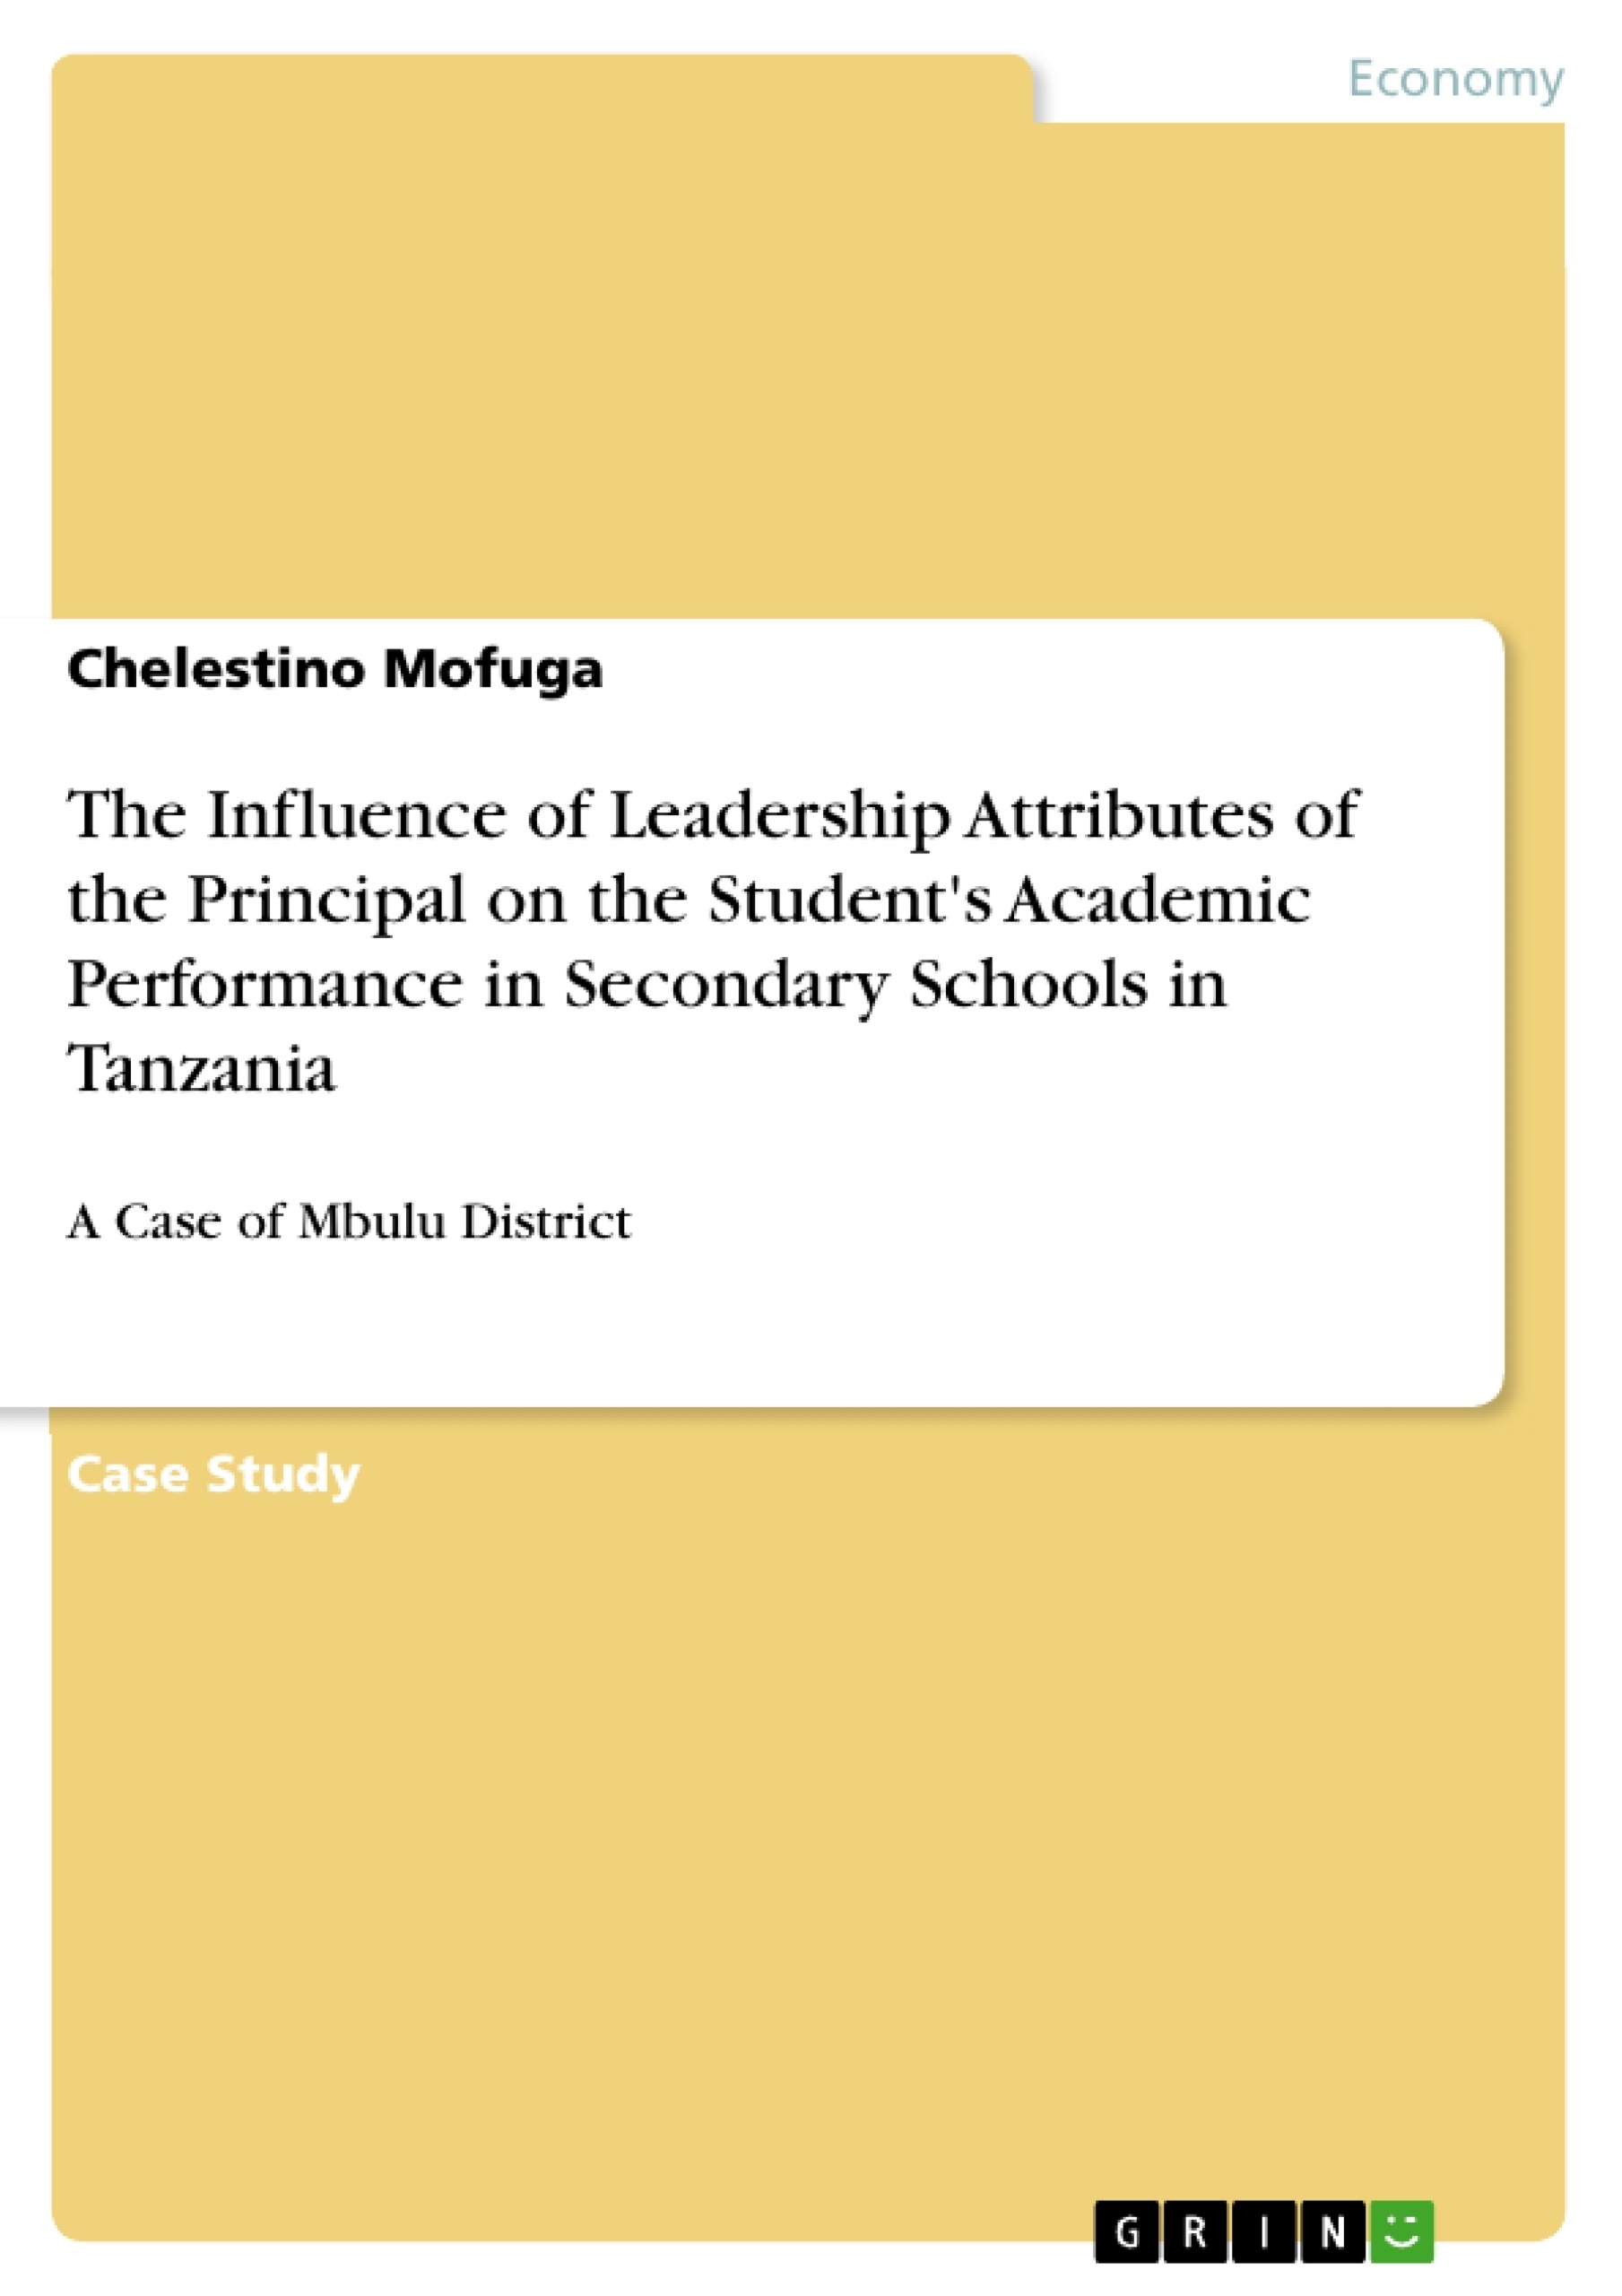 Title: The Influence of Leadership Attributes of the Principal on the Student's Academic Performance in Secondary Schools in Tanzania